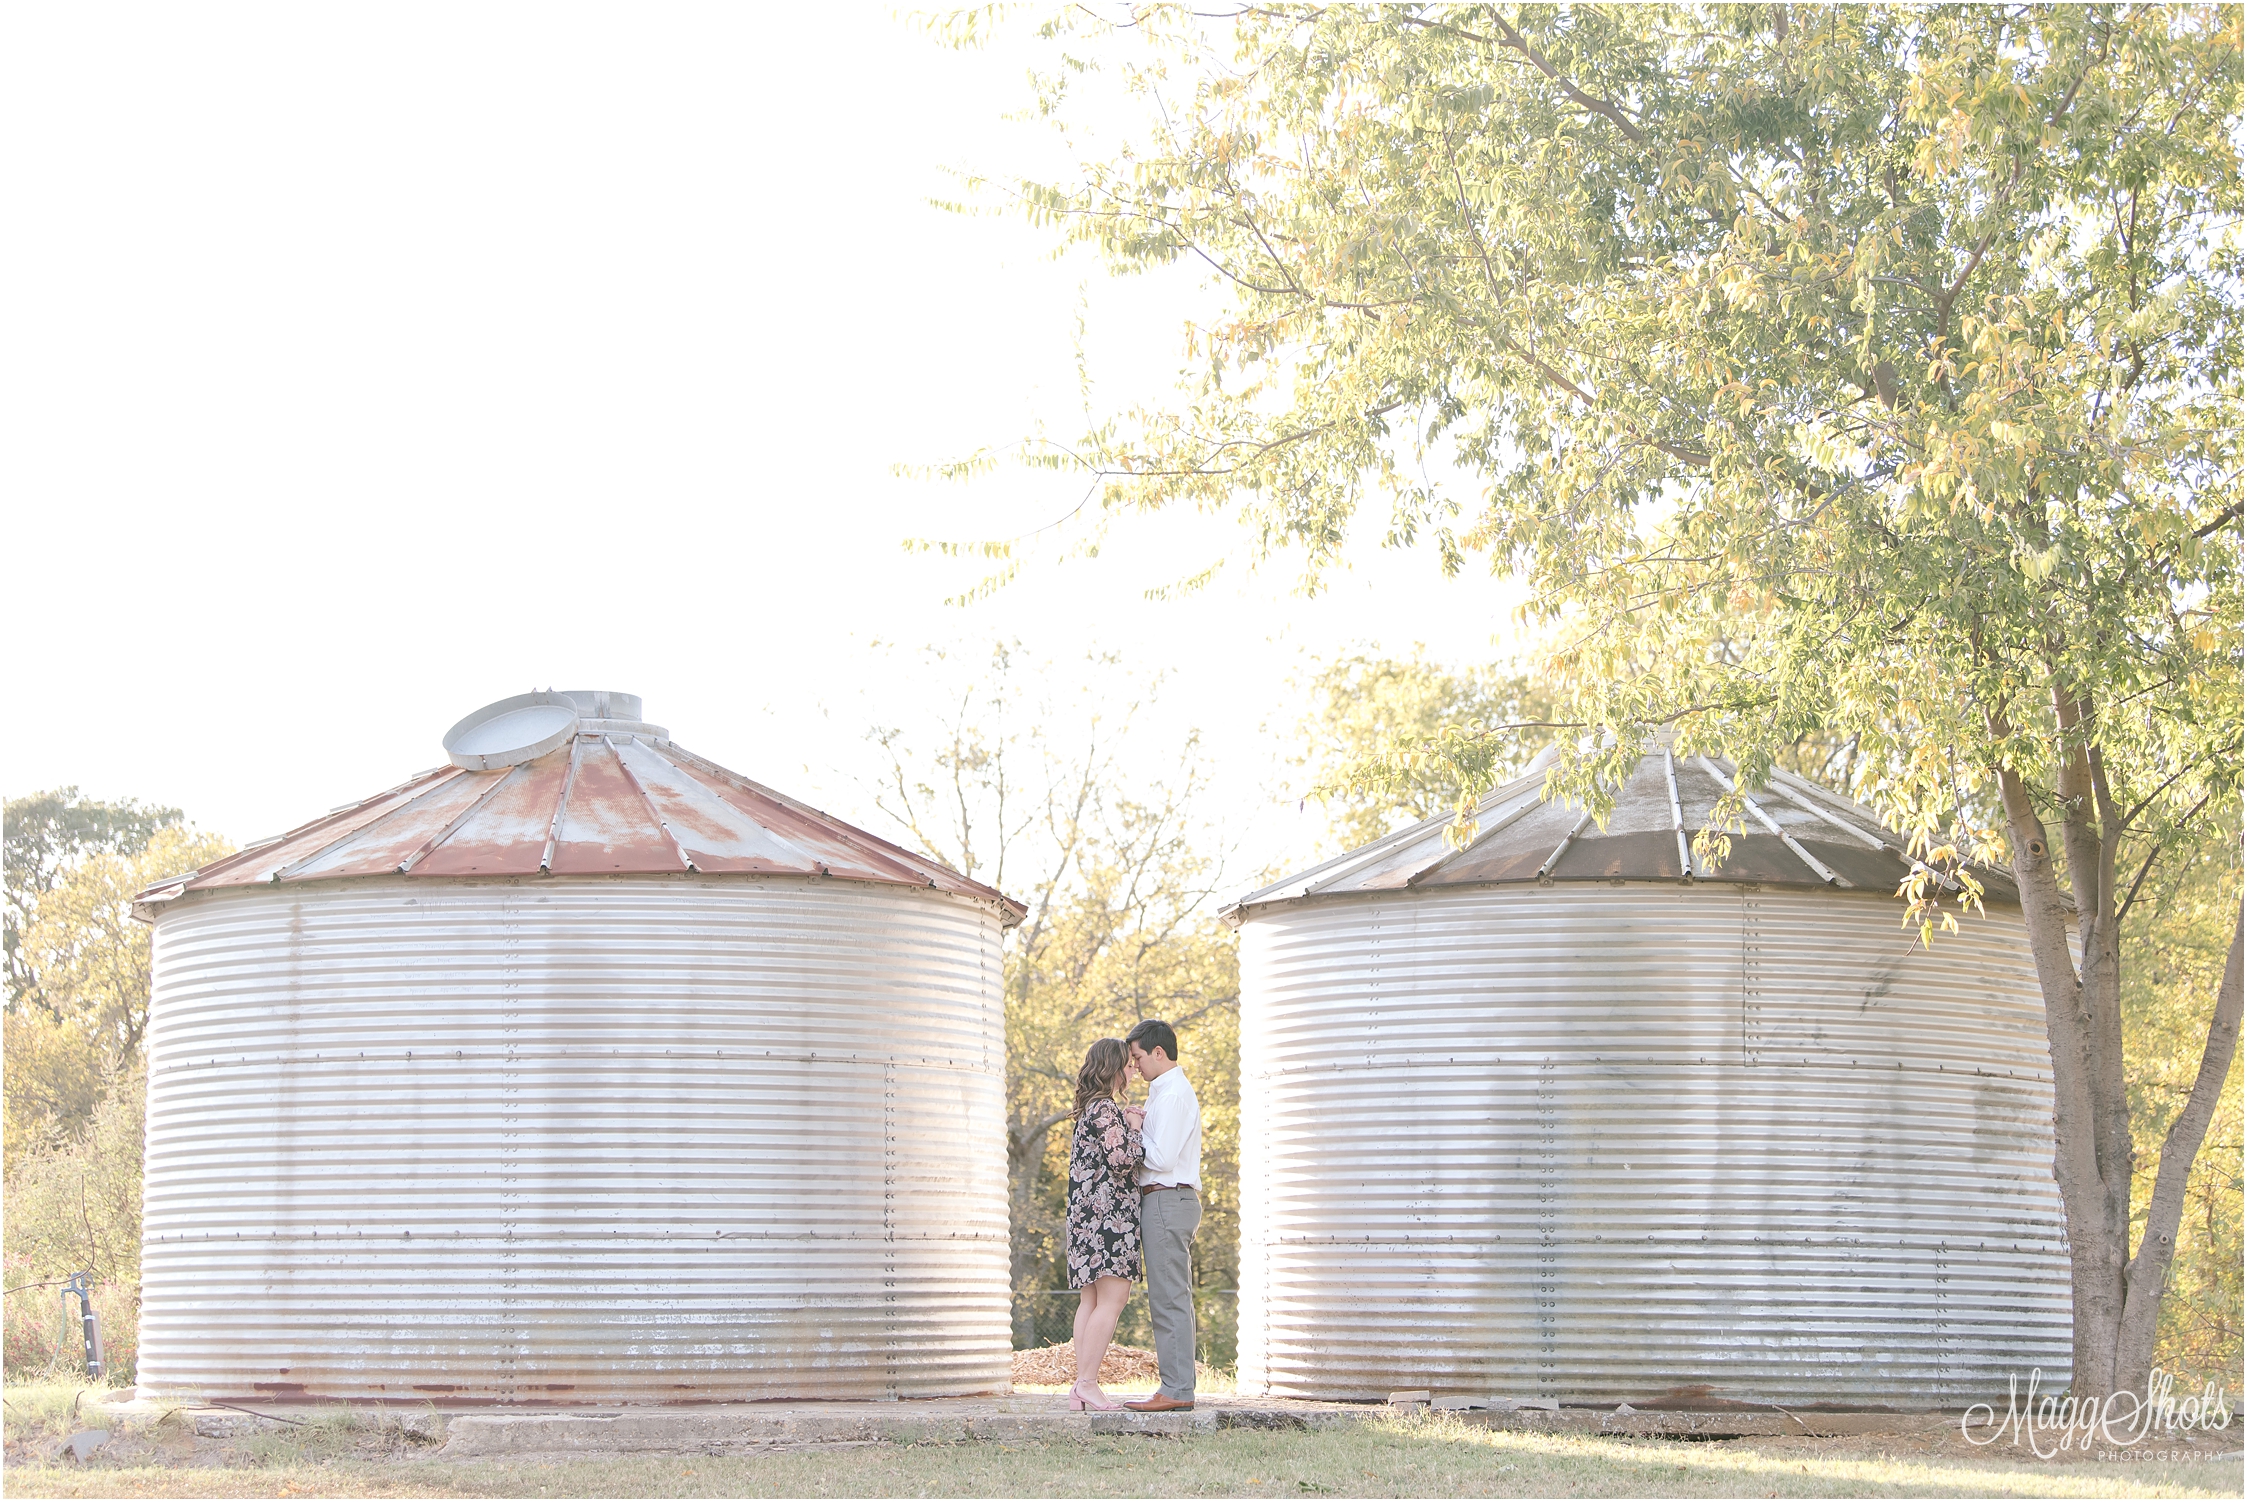 Silos, Engagements, Love, Bride and Groom, Green, Engaged, Wedding, MaggShots Photography, MaggShots, Professional Photographer, Porfessional Photography, DFW Wedding Photographer,